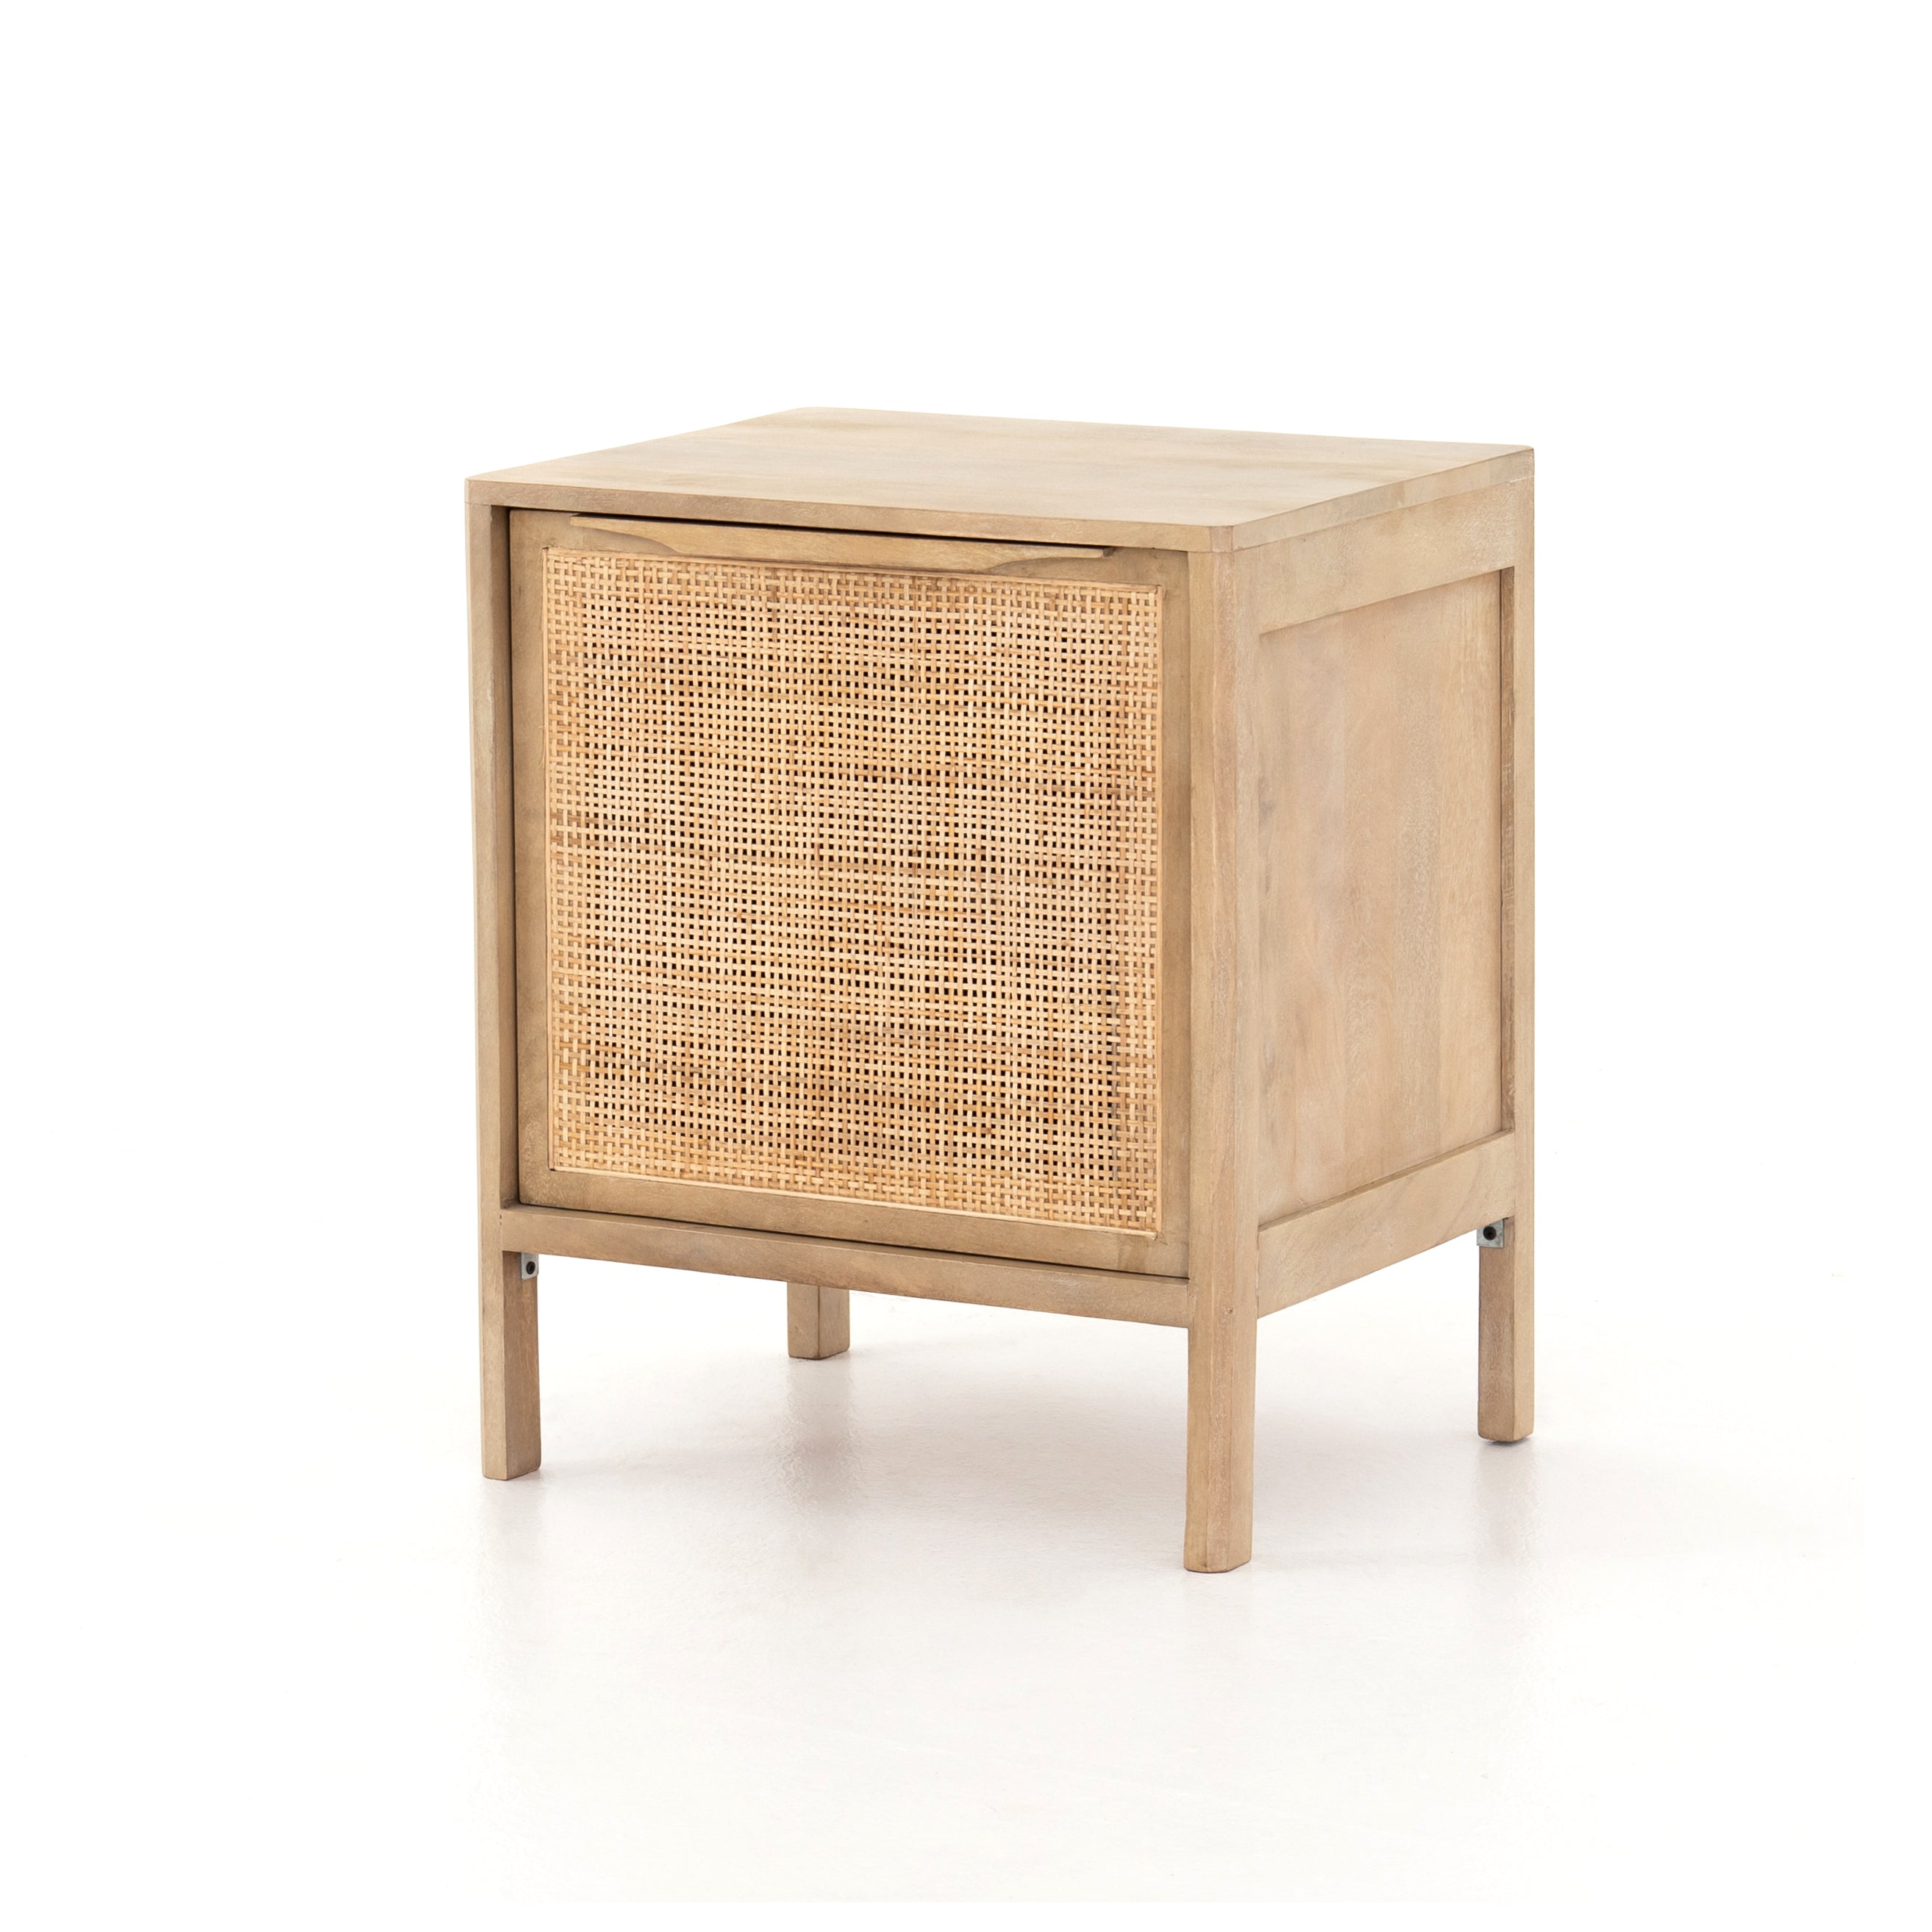 Natural mango frames woven cane, for a light, textural look with fresh organic allure. Interior removable shelf for extra storage options. Amethyst Home provides interior design, new construction, custom furniture, and area rugs in the Portland metro area.